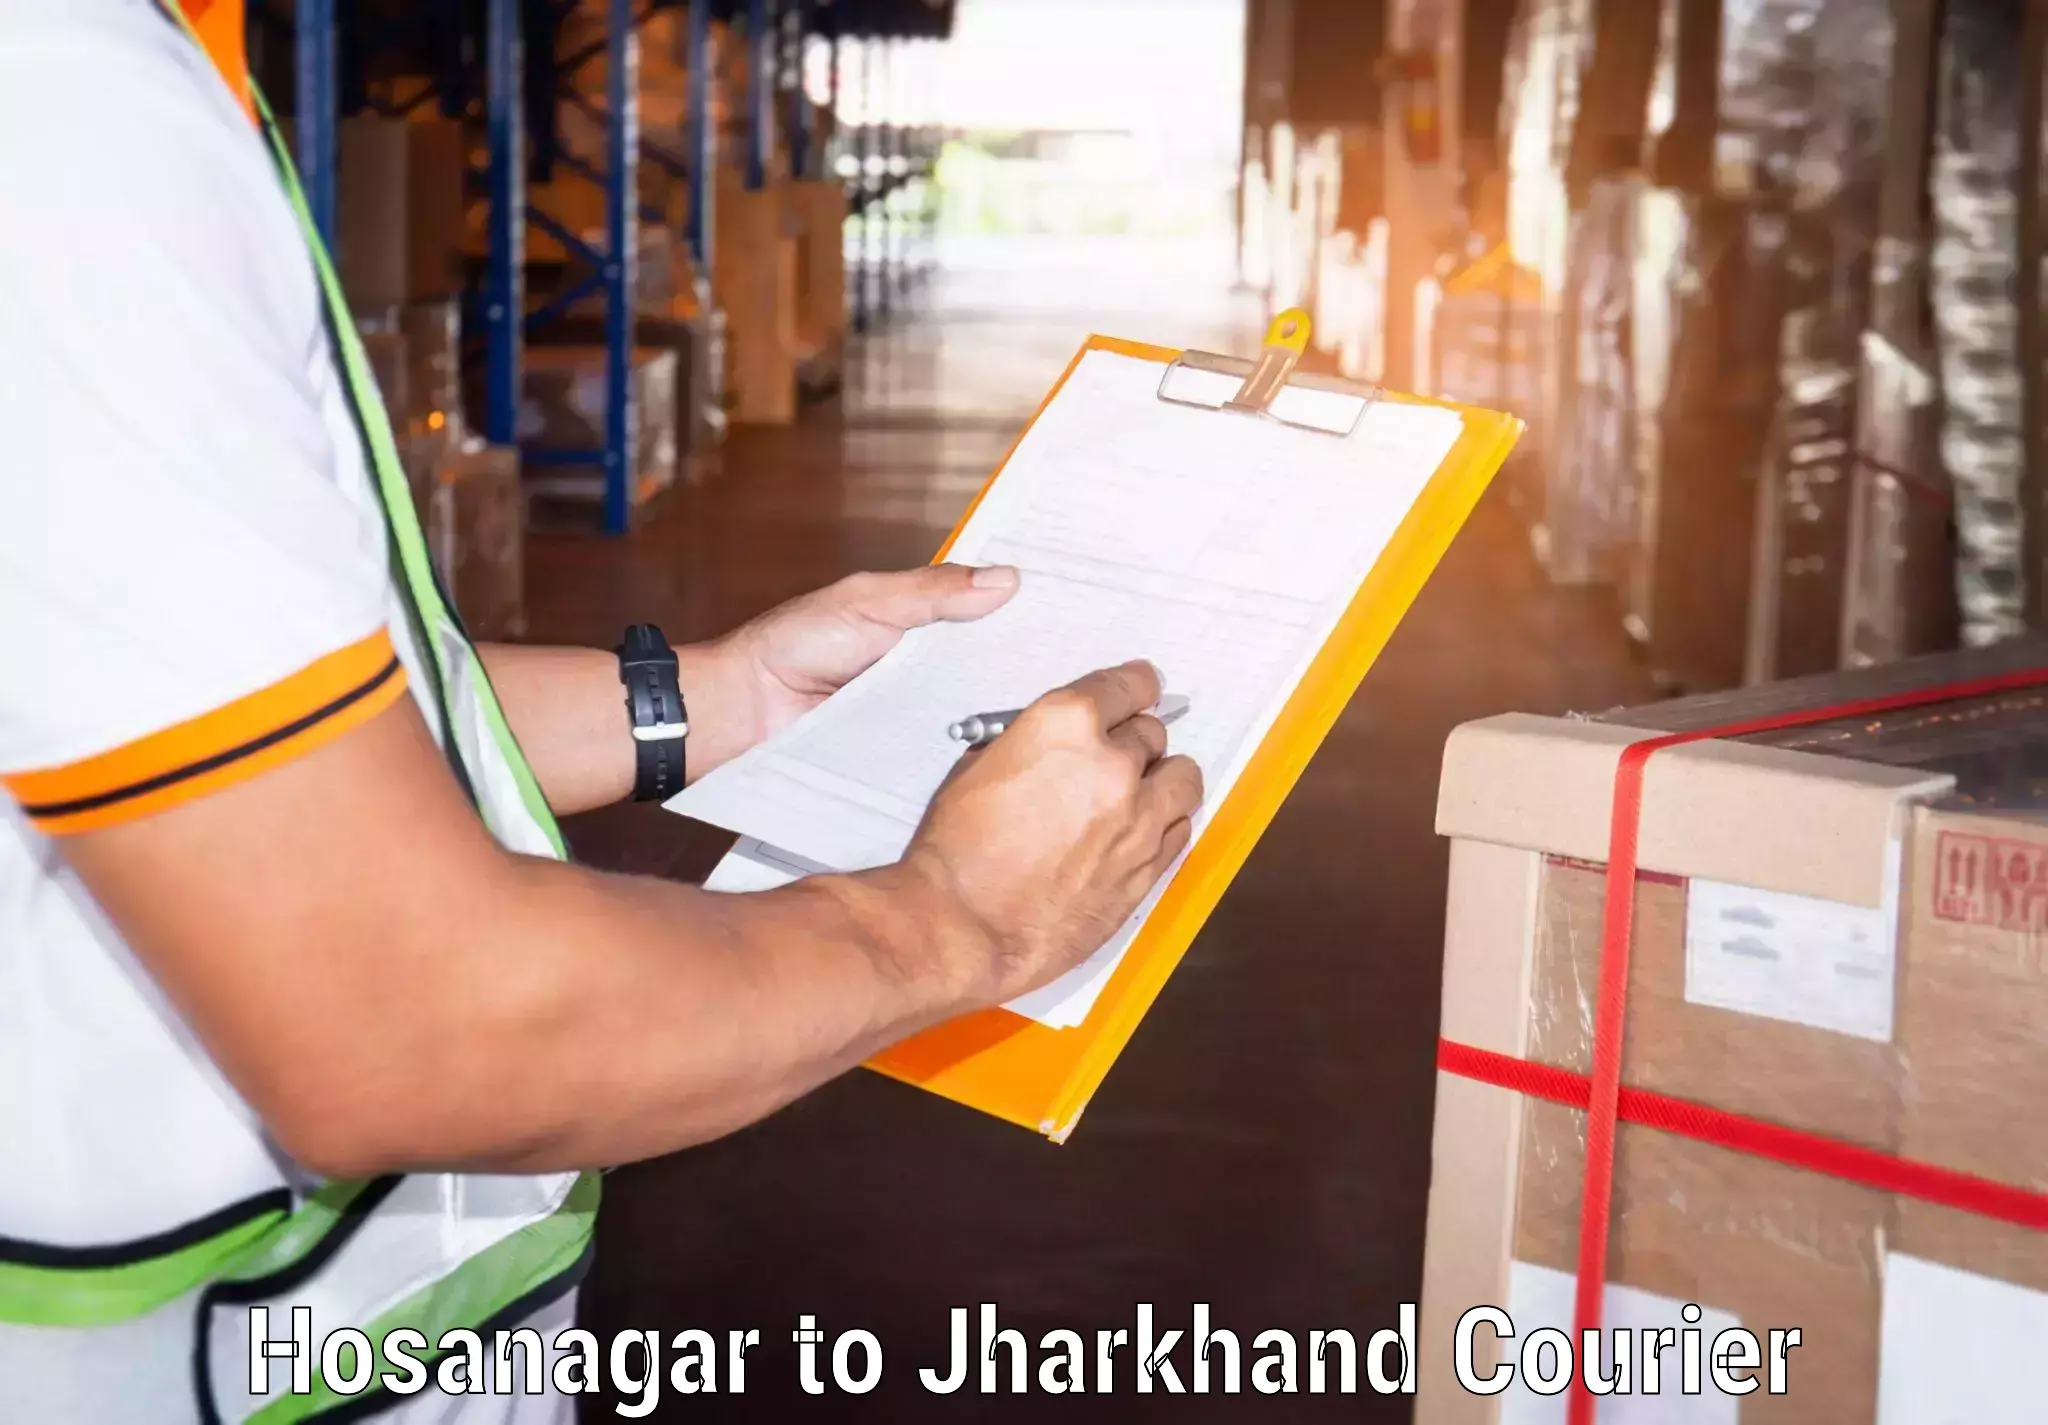 Fast delivery service Hosanagar to Jharkhand